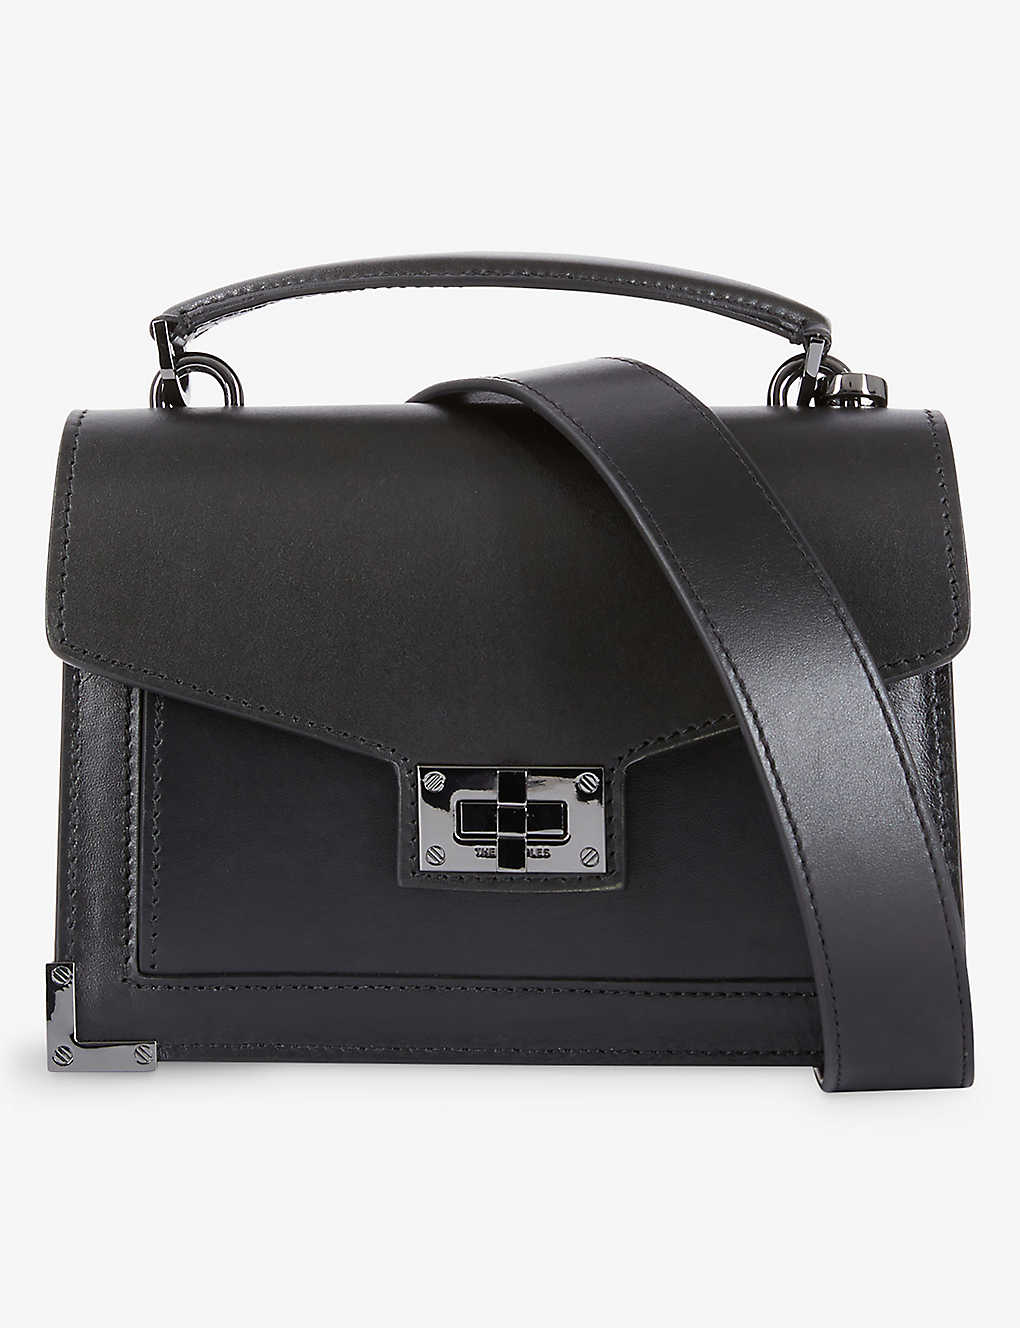 The Kooples Womens Black Emily Top-handle Small Leather Shoulder Bag